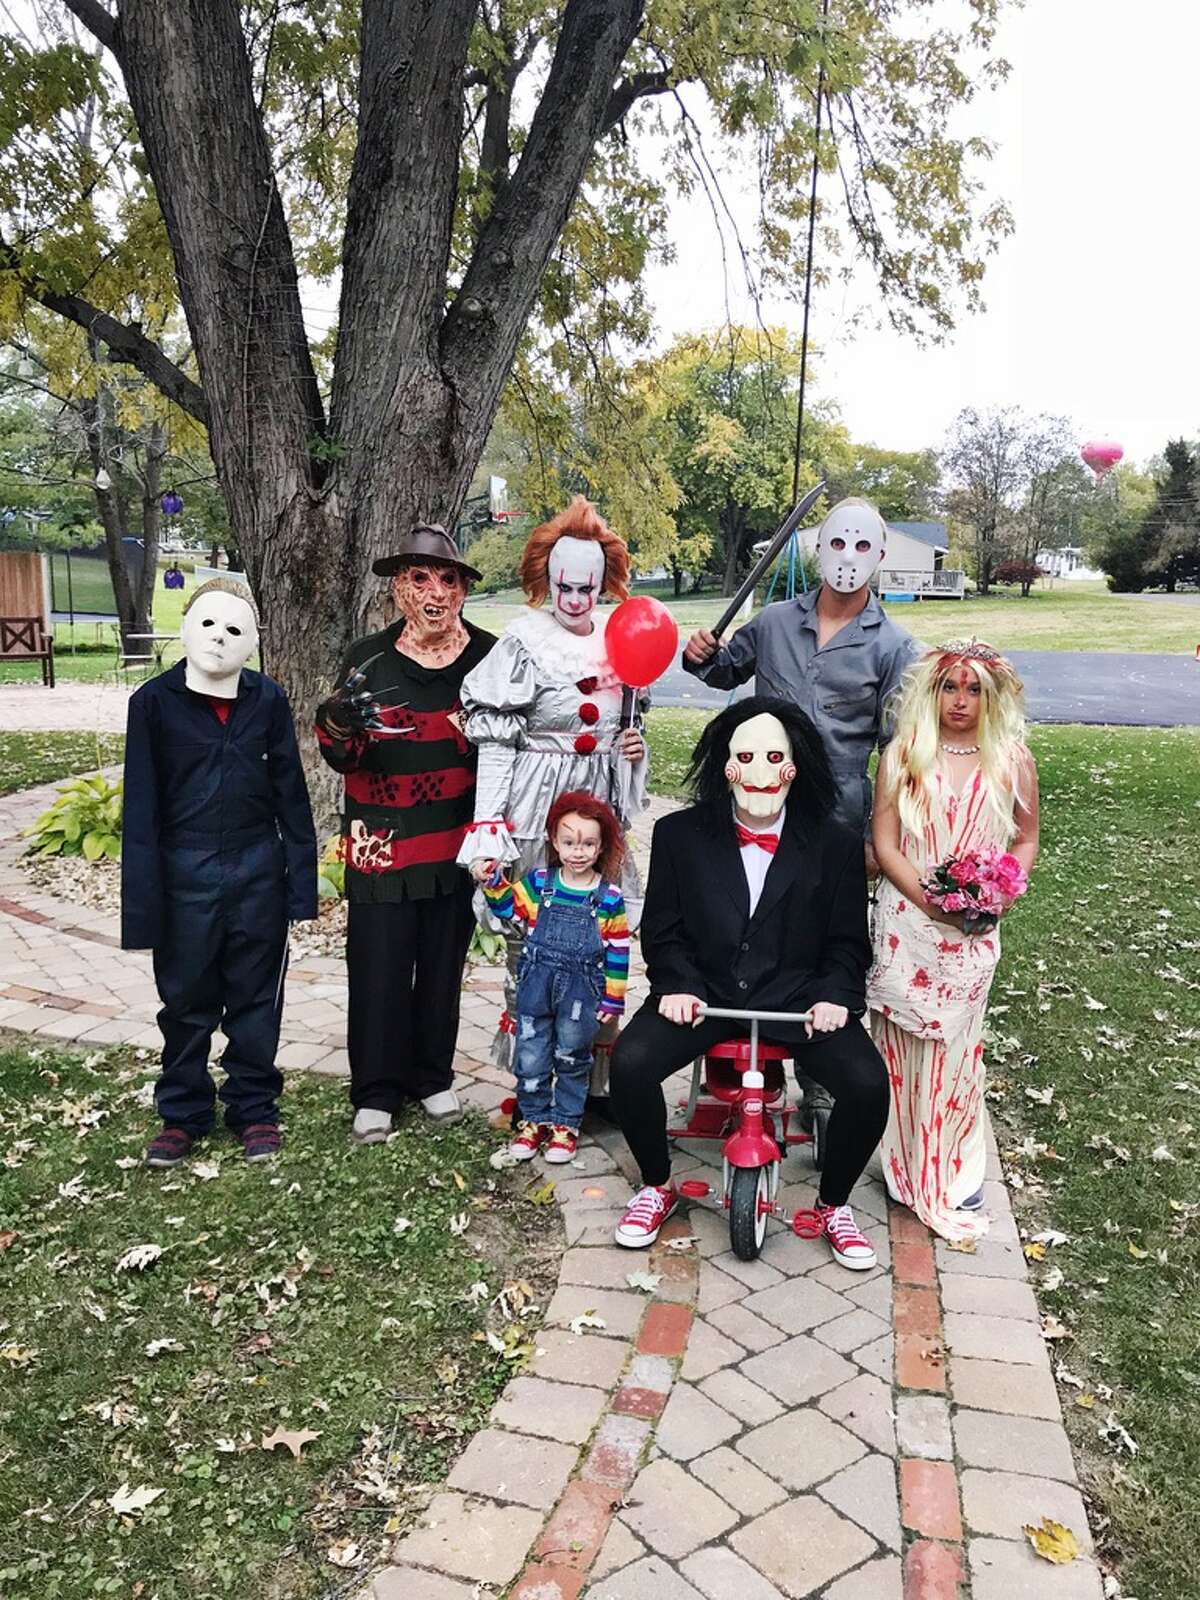 The Sullivans dressed as popular horror characters from popular movies.